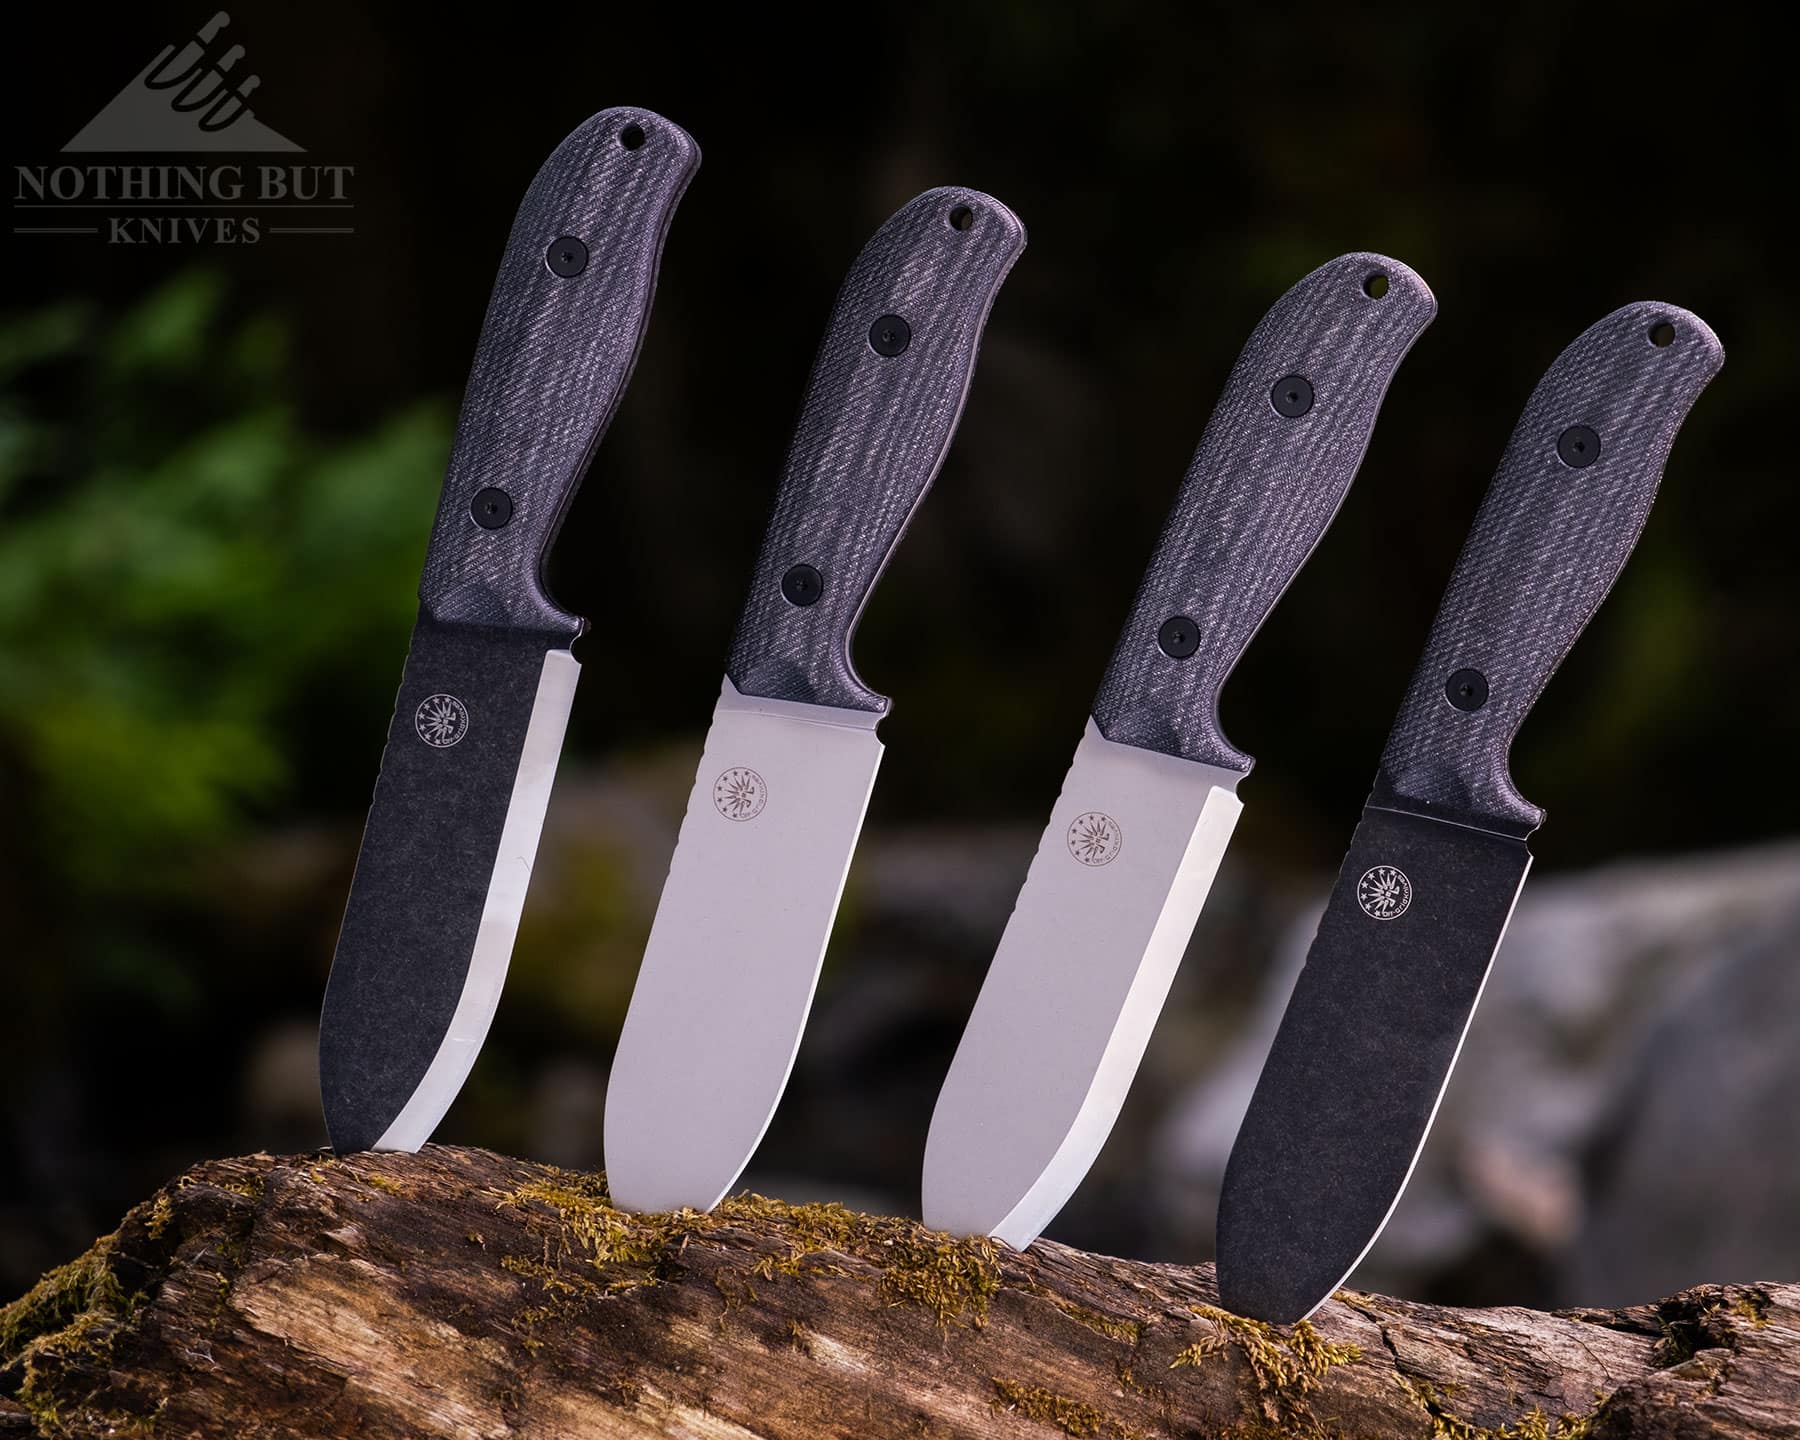 The Off-Grid Ridgeback bushcraft knife is available with either a flat or Scandi grind.